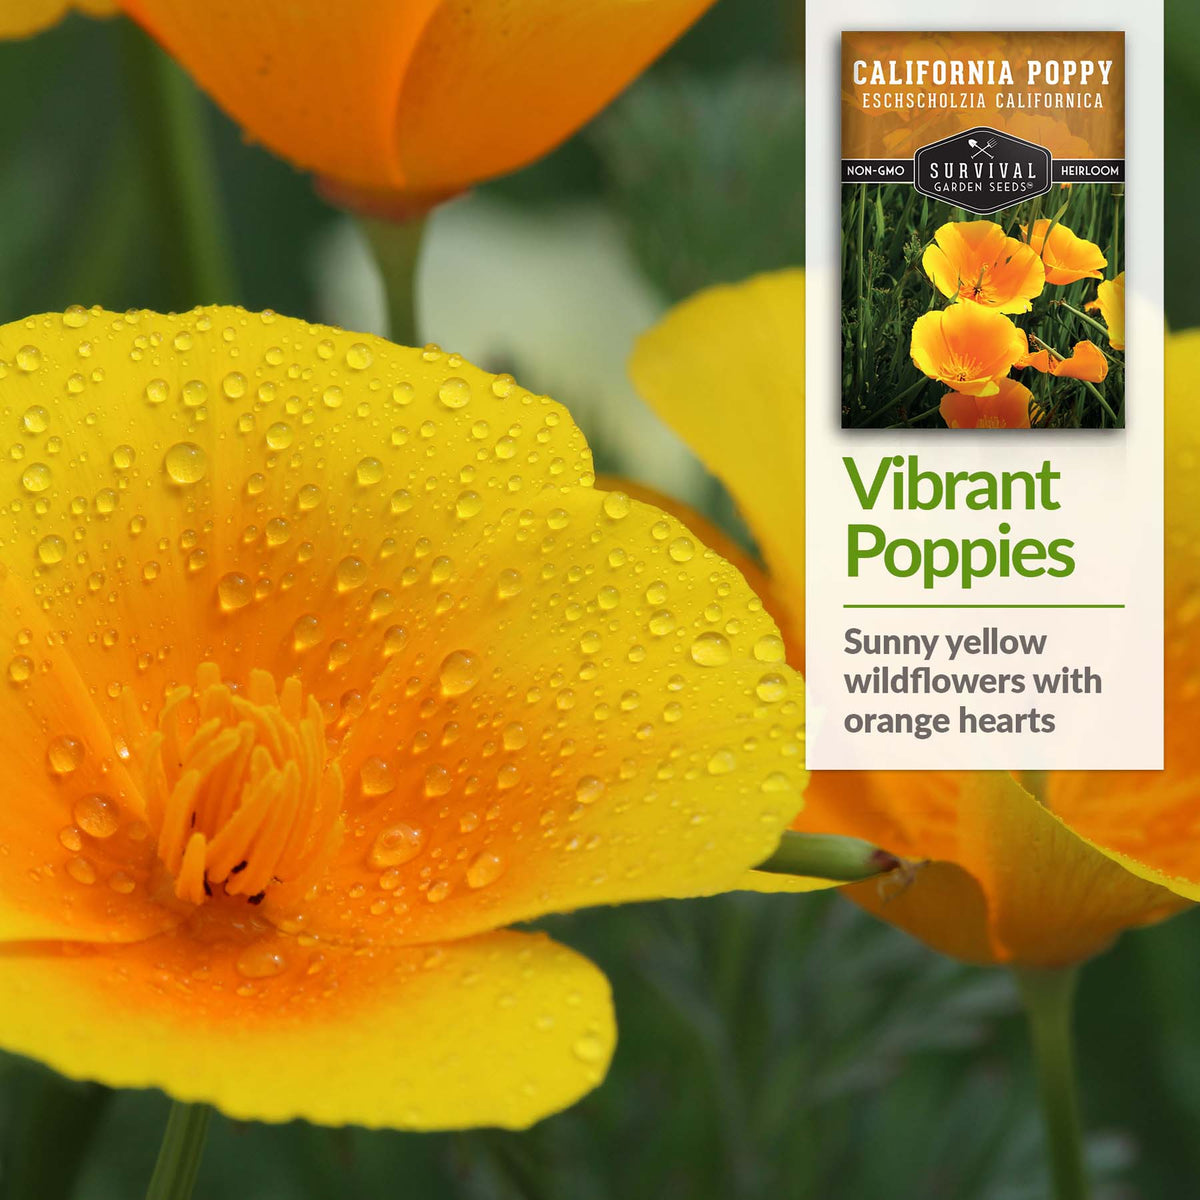 Golden West California Poppies have sunny yellow flowers with orange centers